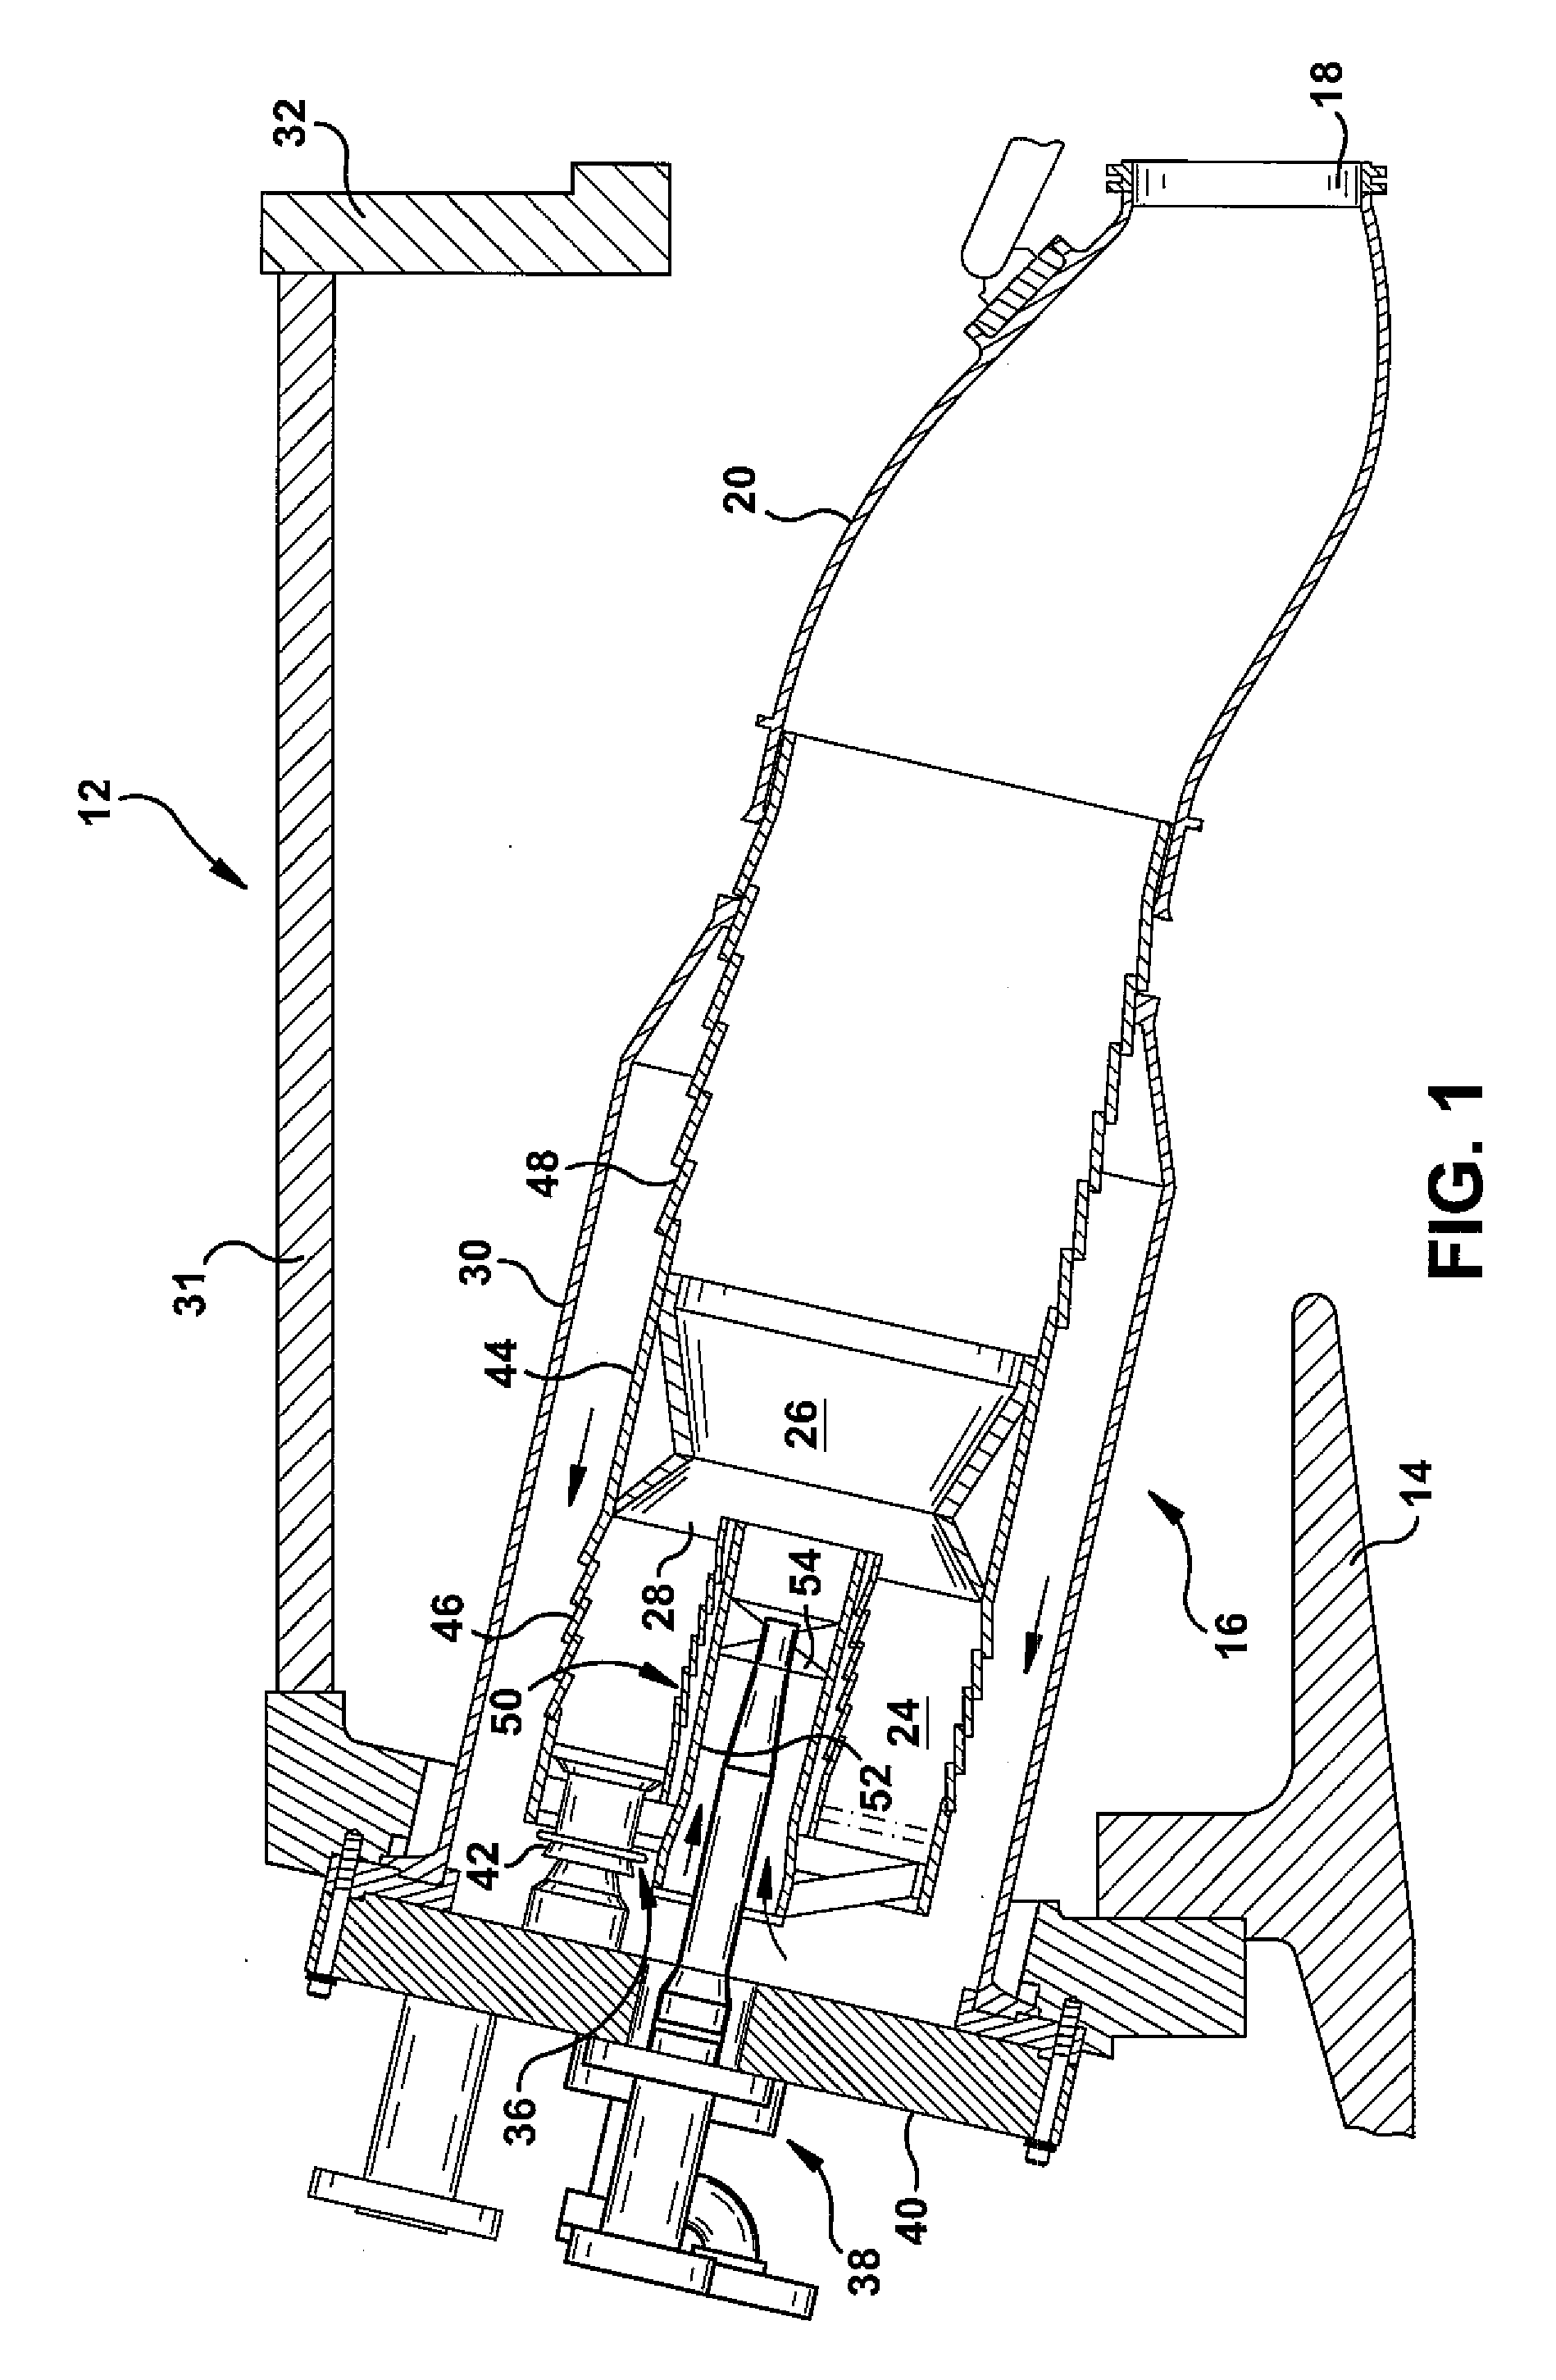 Toroidal ring manifold for secondary fuel nozzle of a dln gas turbine